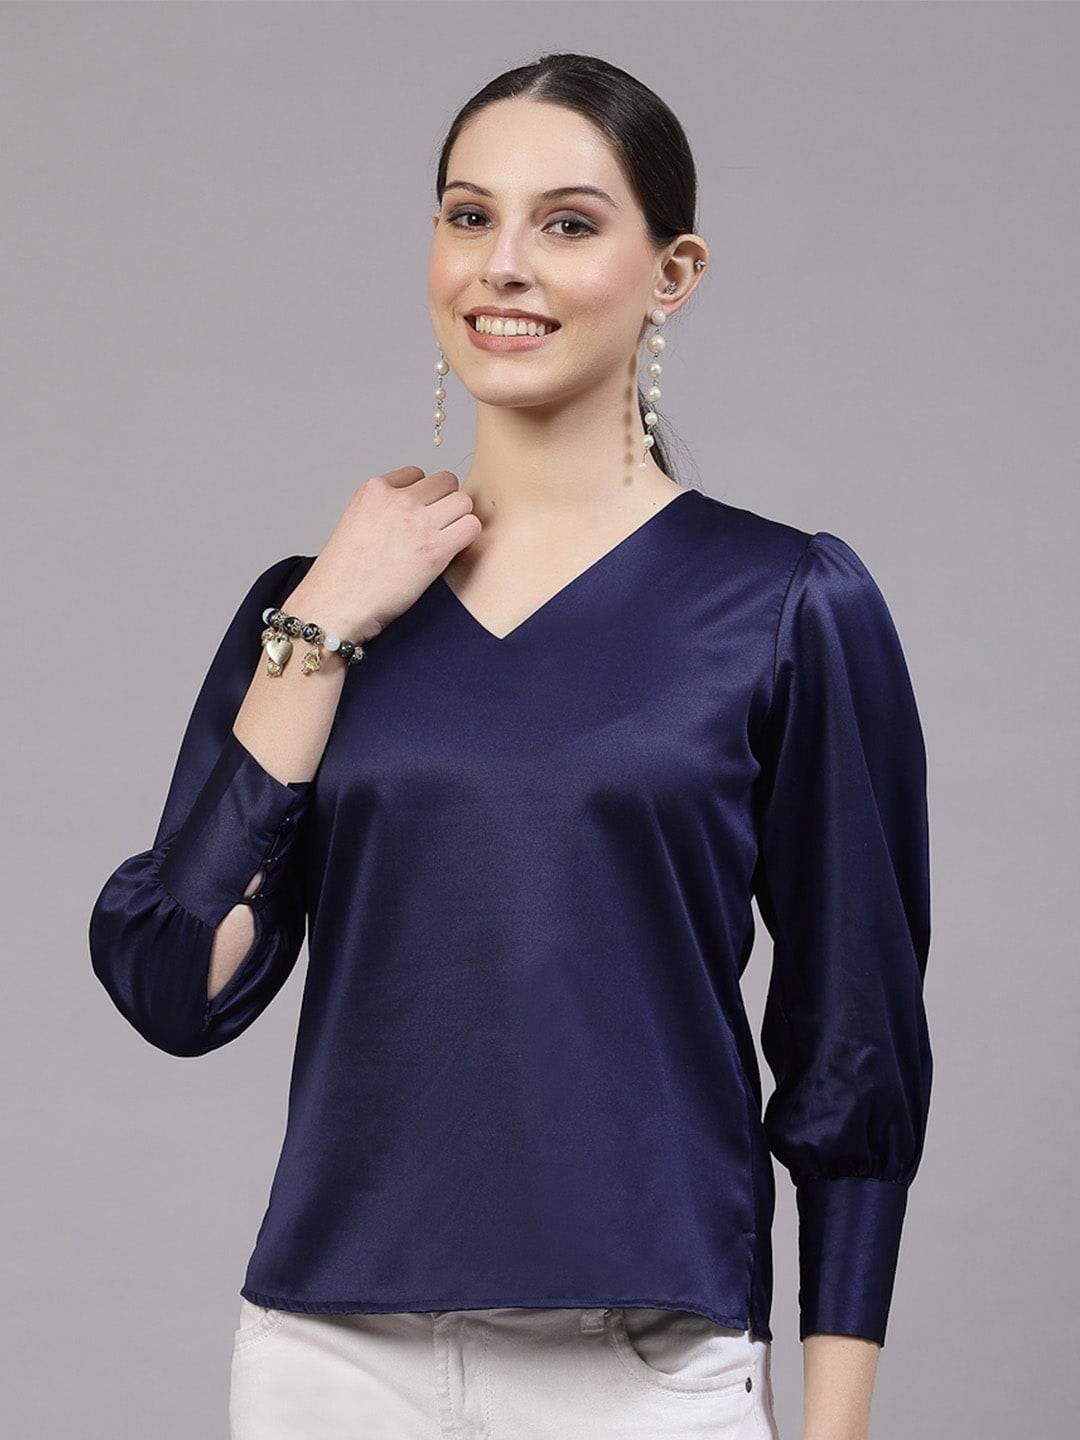 style quotient v-neck cuffed sleeves satin top